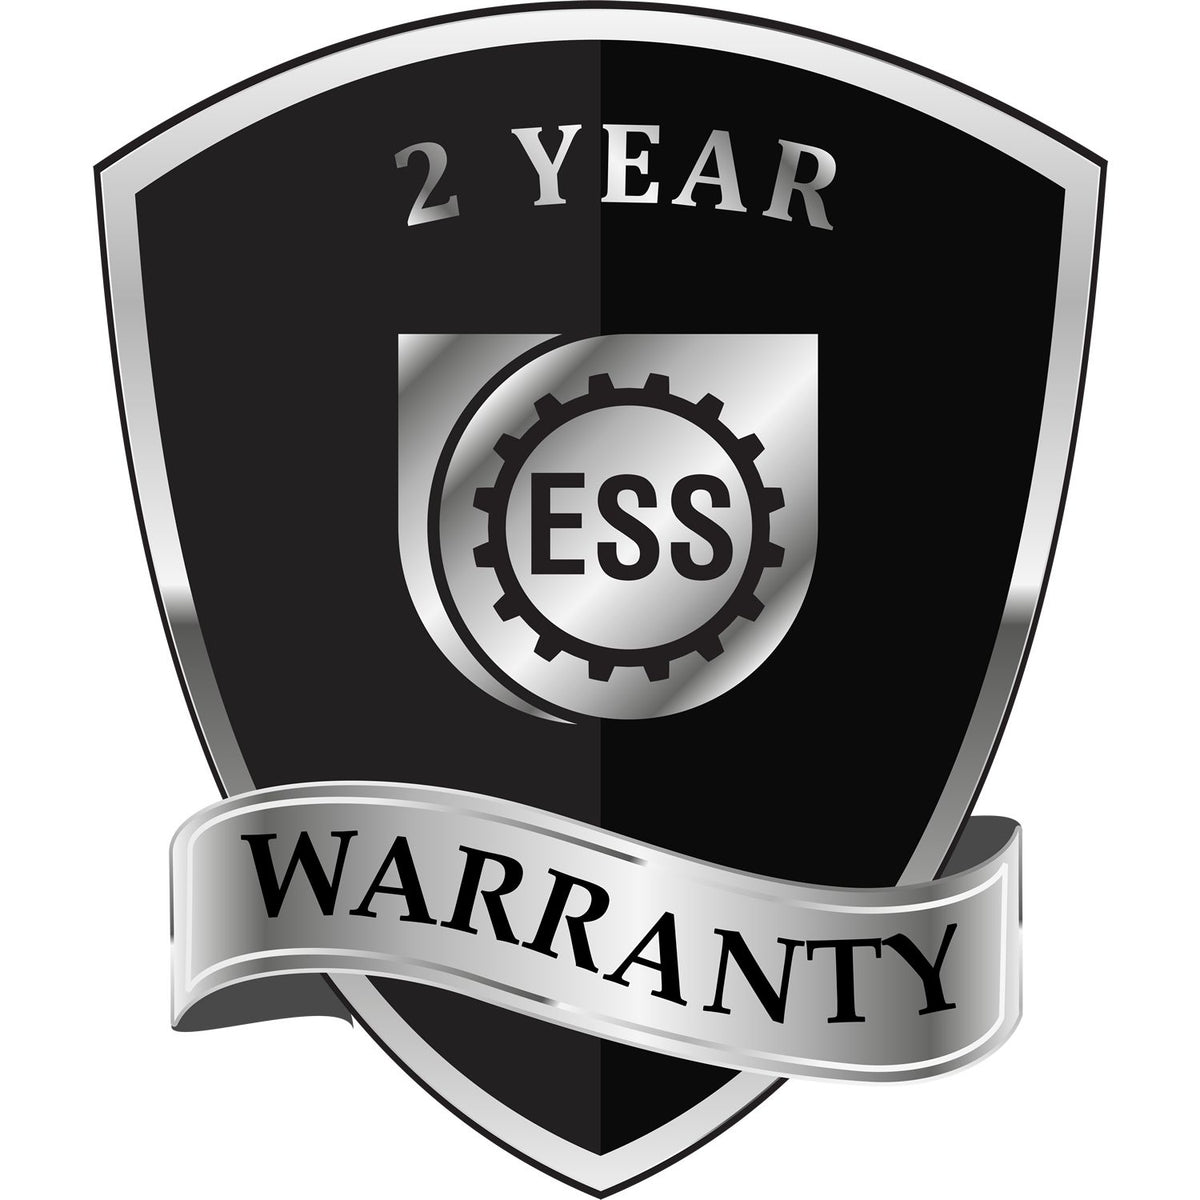 A black and silver badge or emblem showing warranty information for the Soft Arizona Professional Geologist Seal